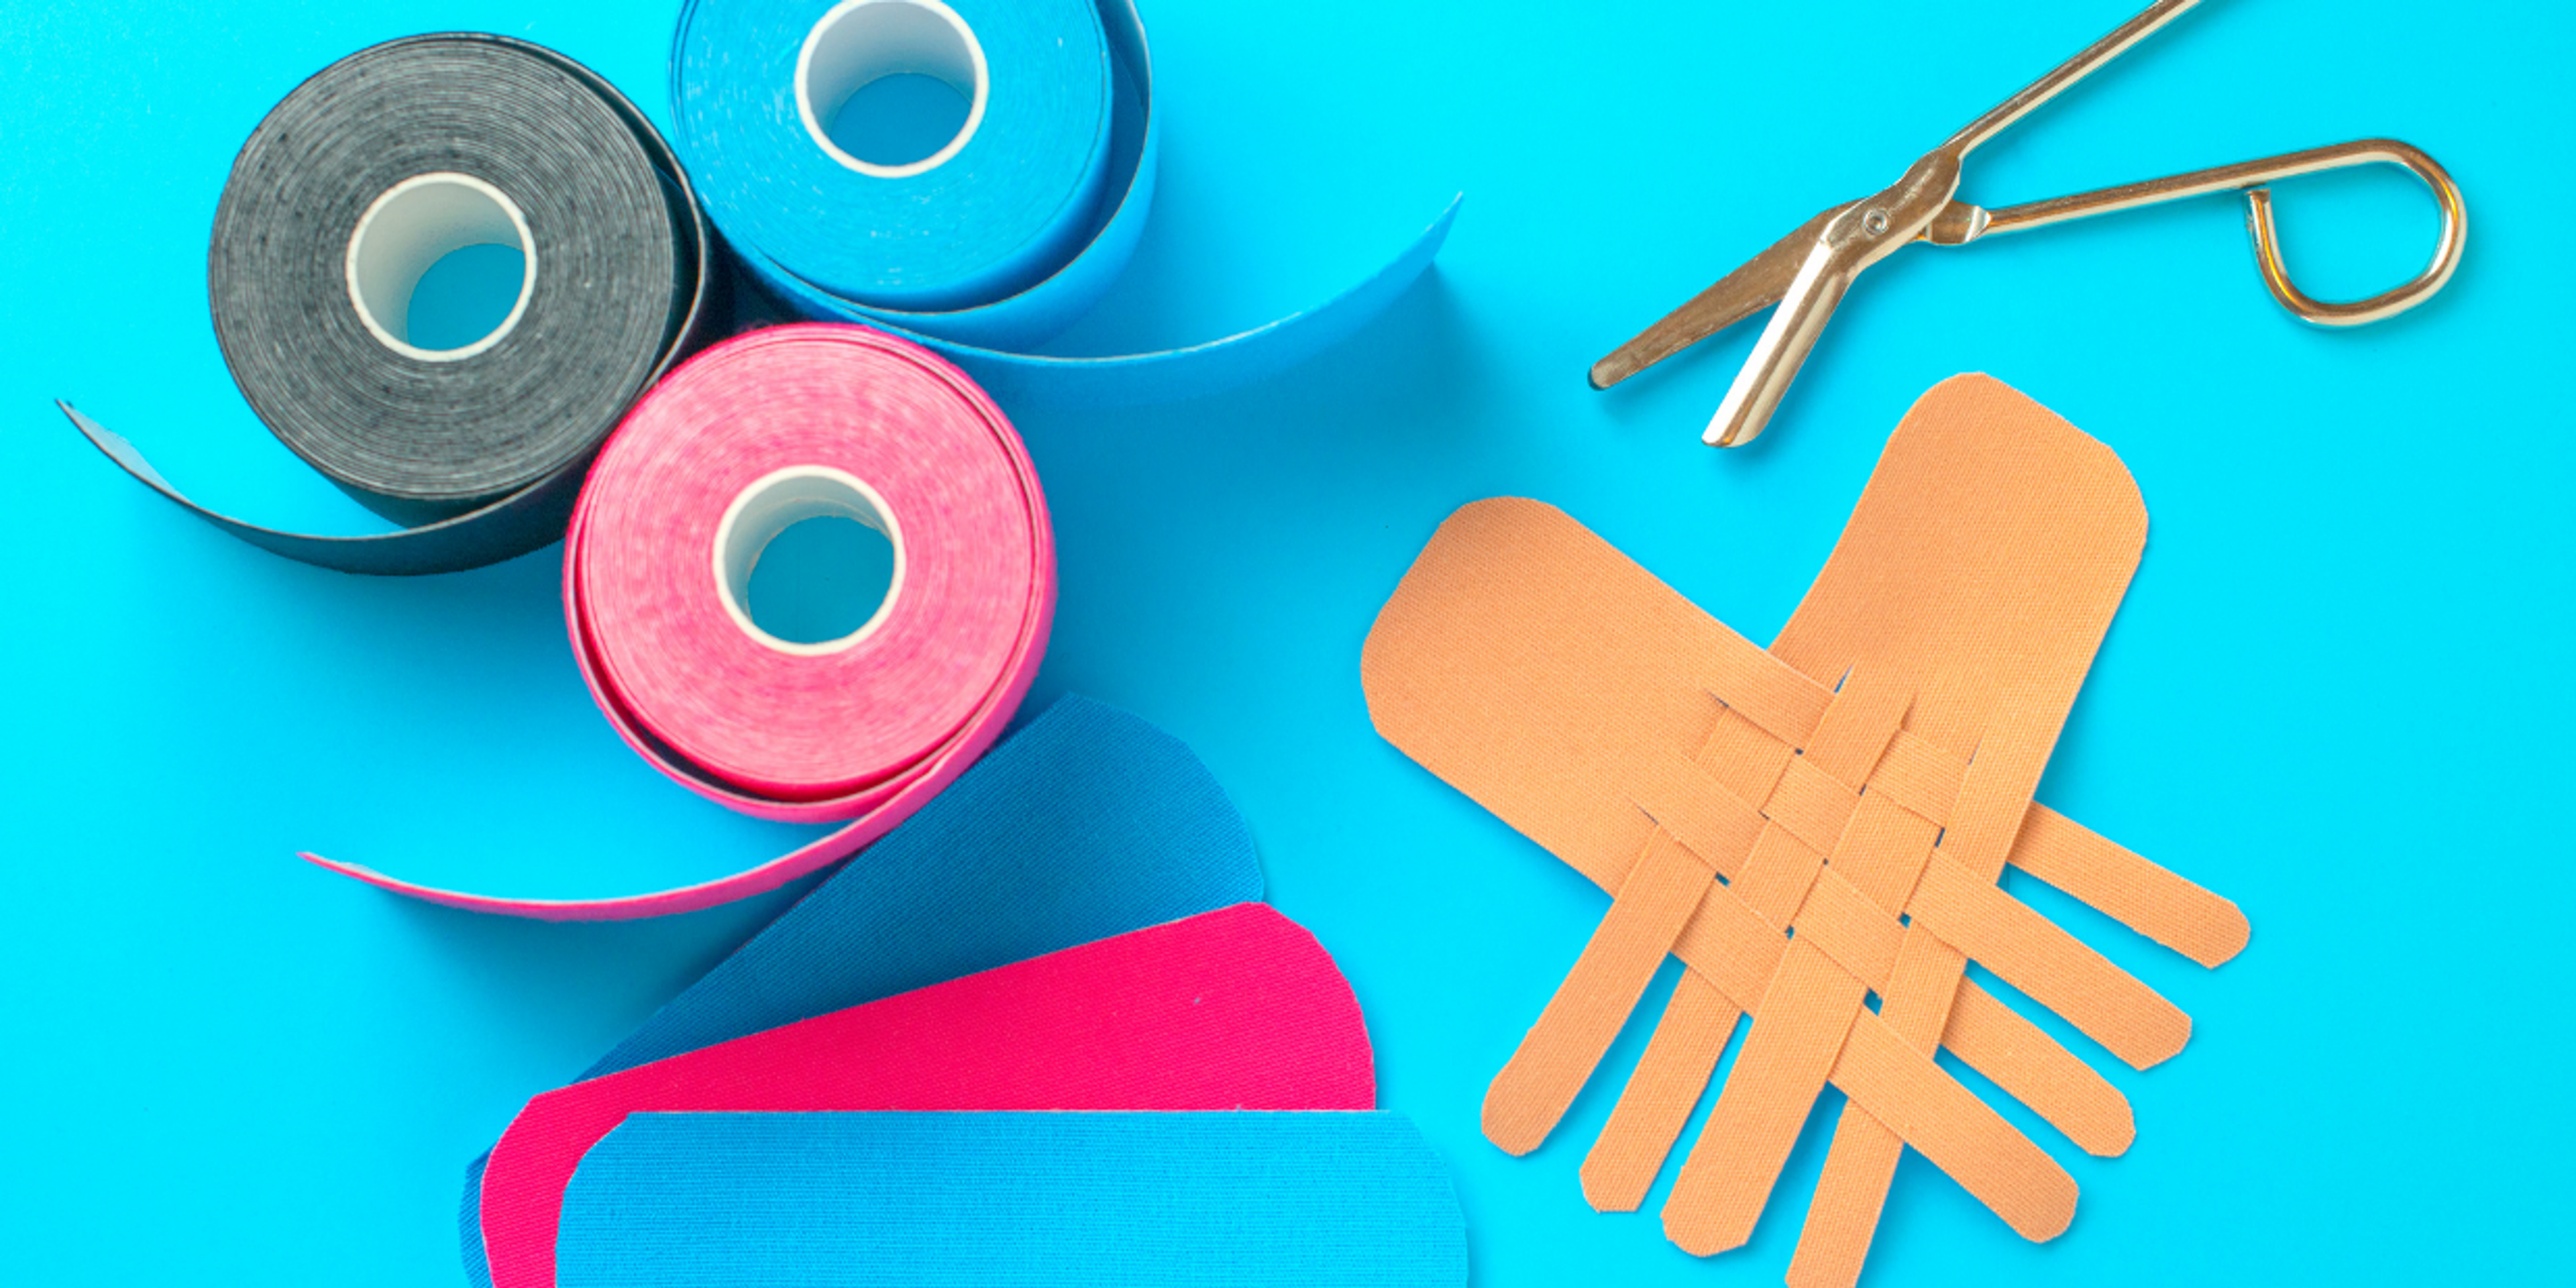 Kinesiotape comes pre-cut or in rolls.